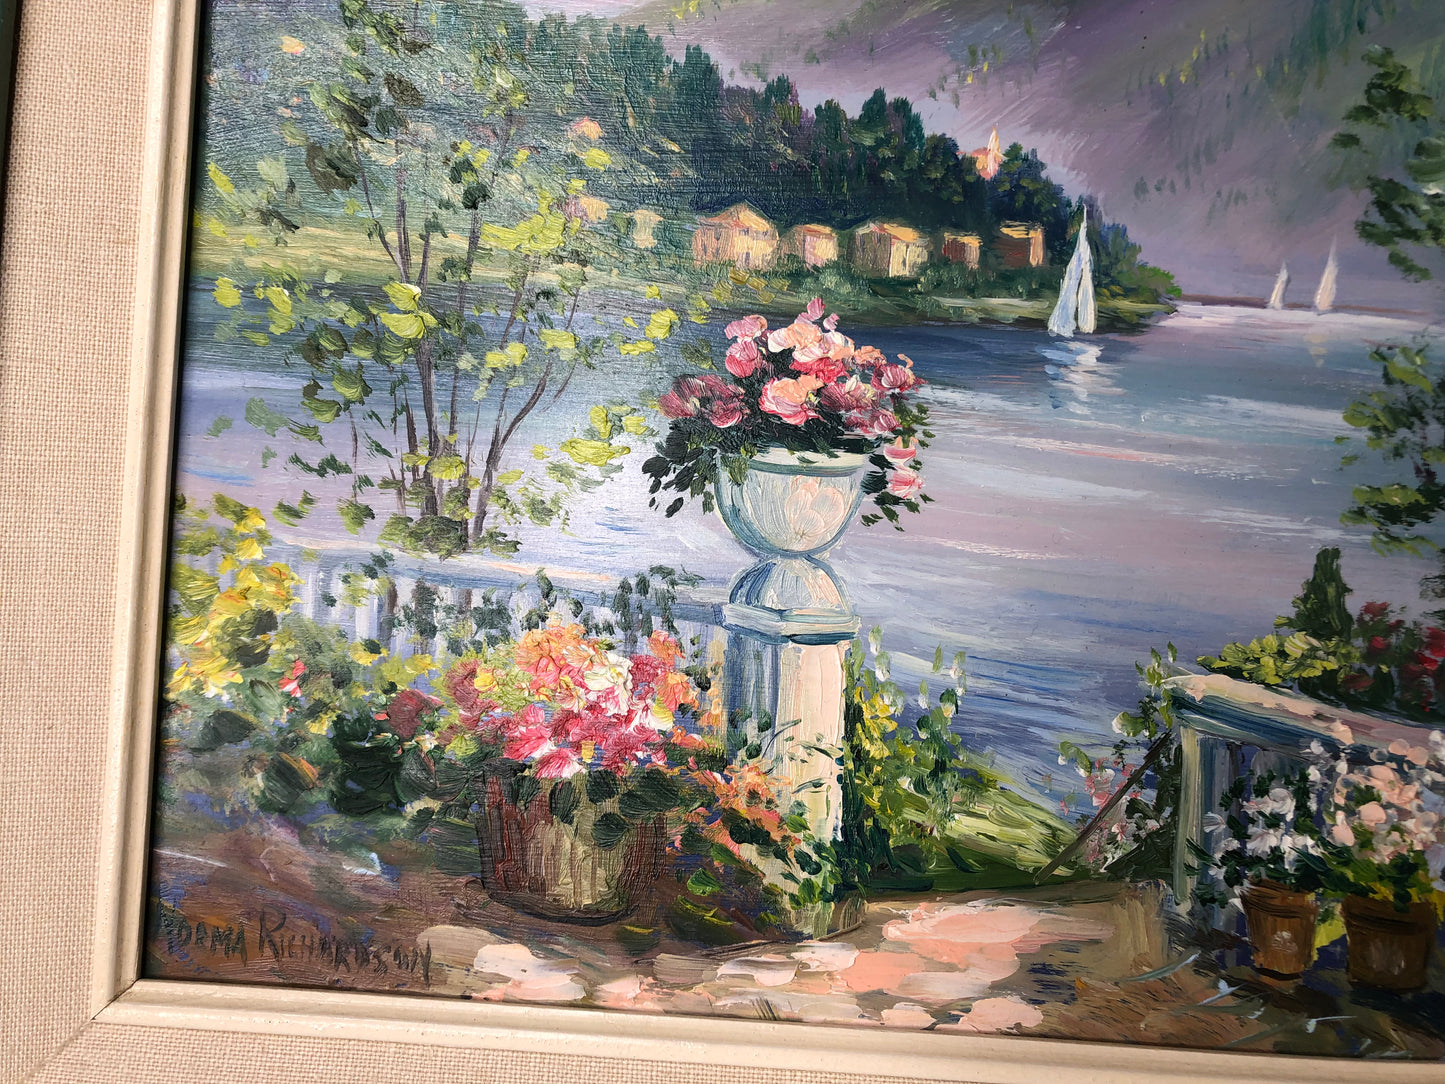 Gorgeous Original Oil on Board Painting of lakeside terrace with flowers signed by artist - Excellent condition!